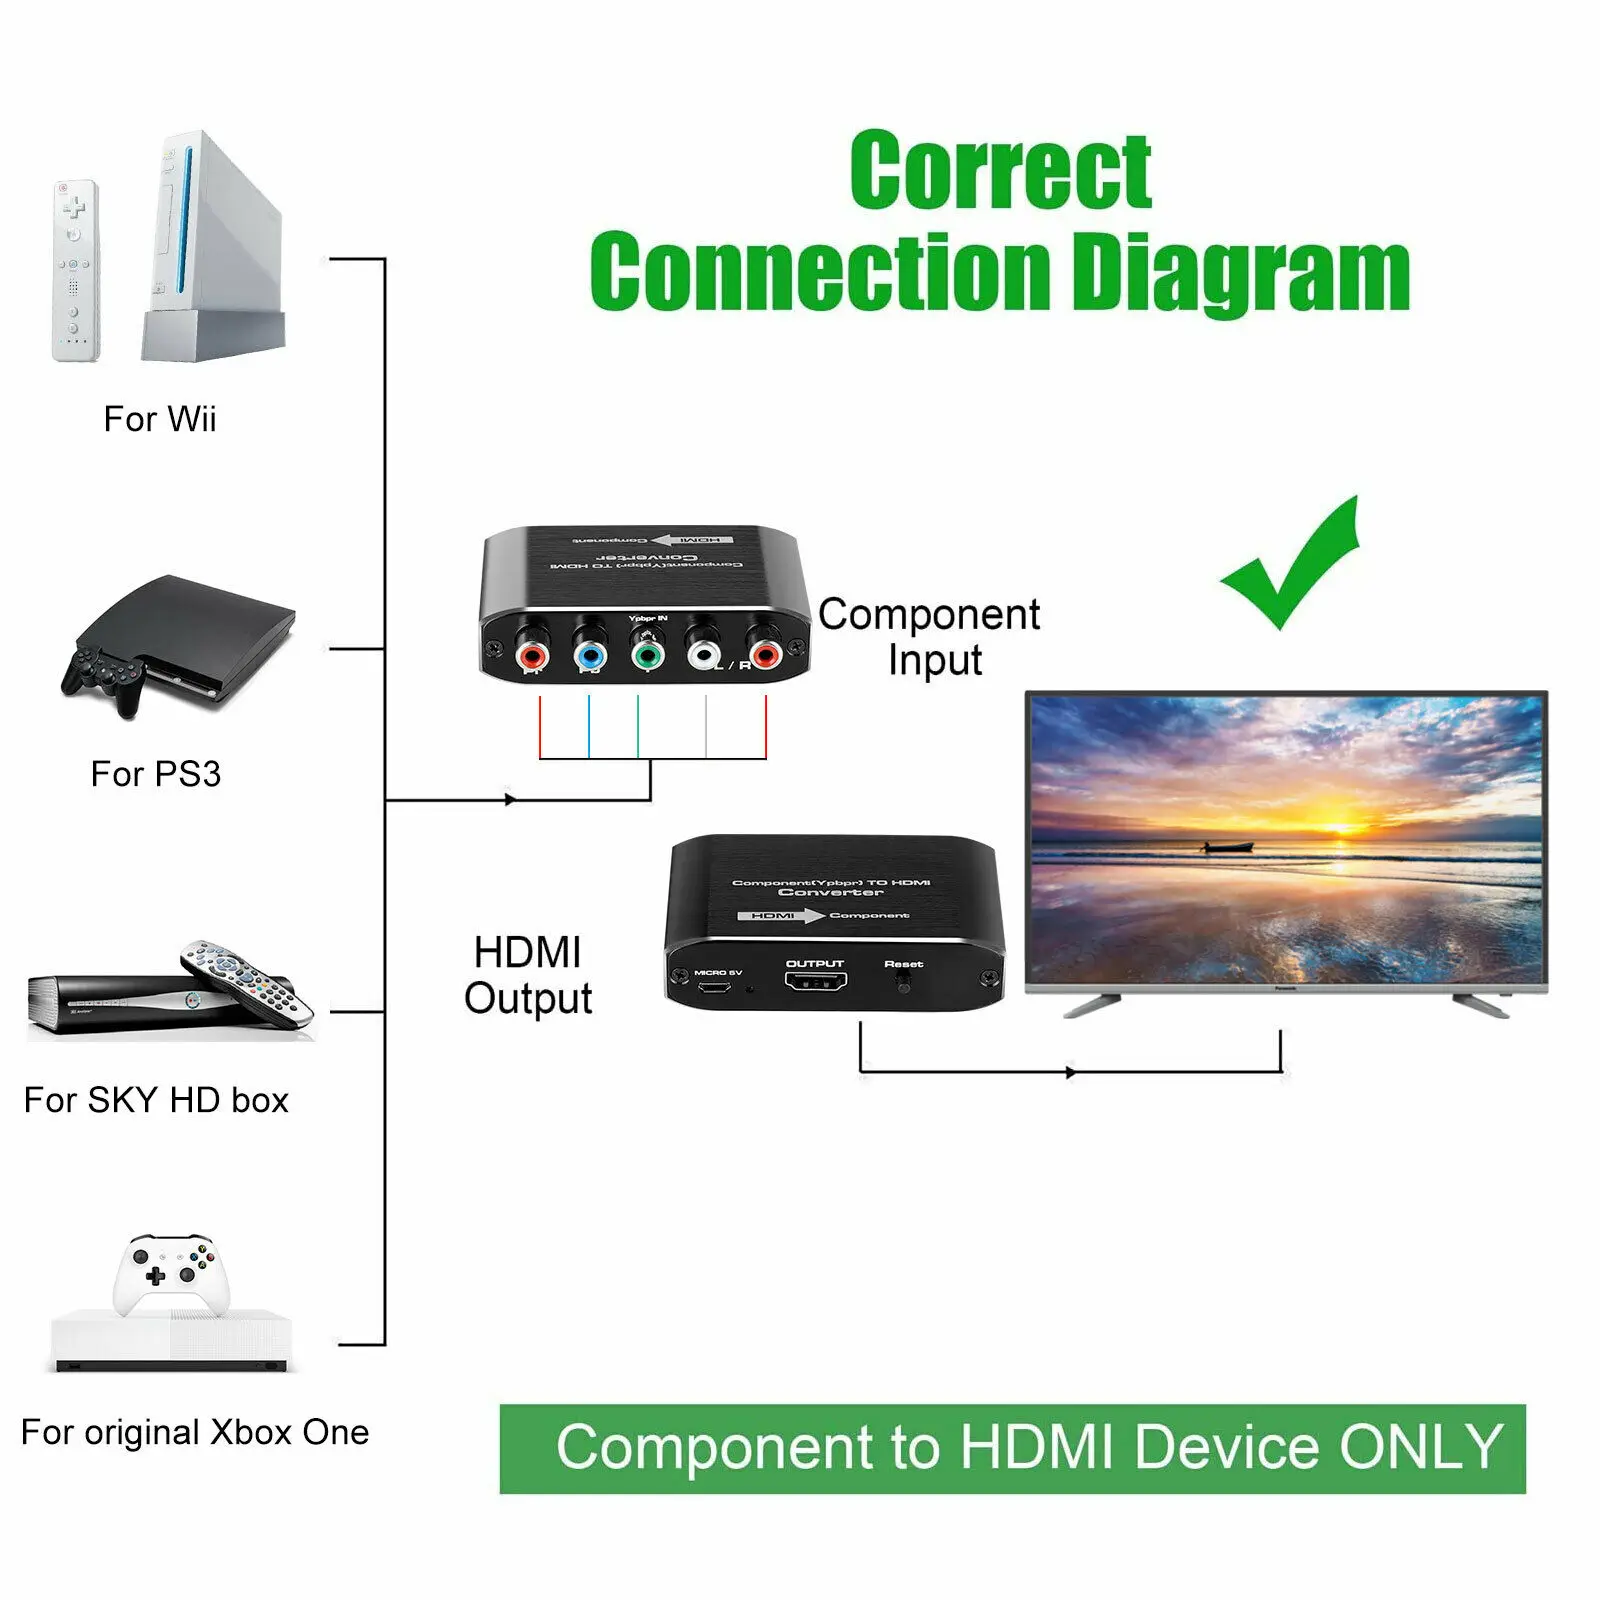 Component RGB RCA VGA to HDMI AV Converter Adapter Box for VHS DVD PS2 Xbox Wii images - 6